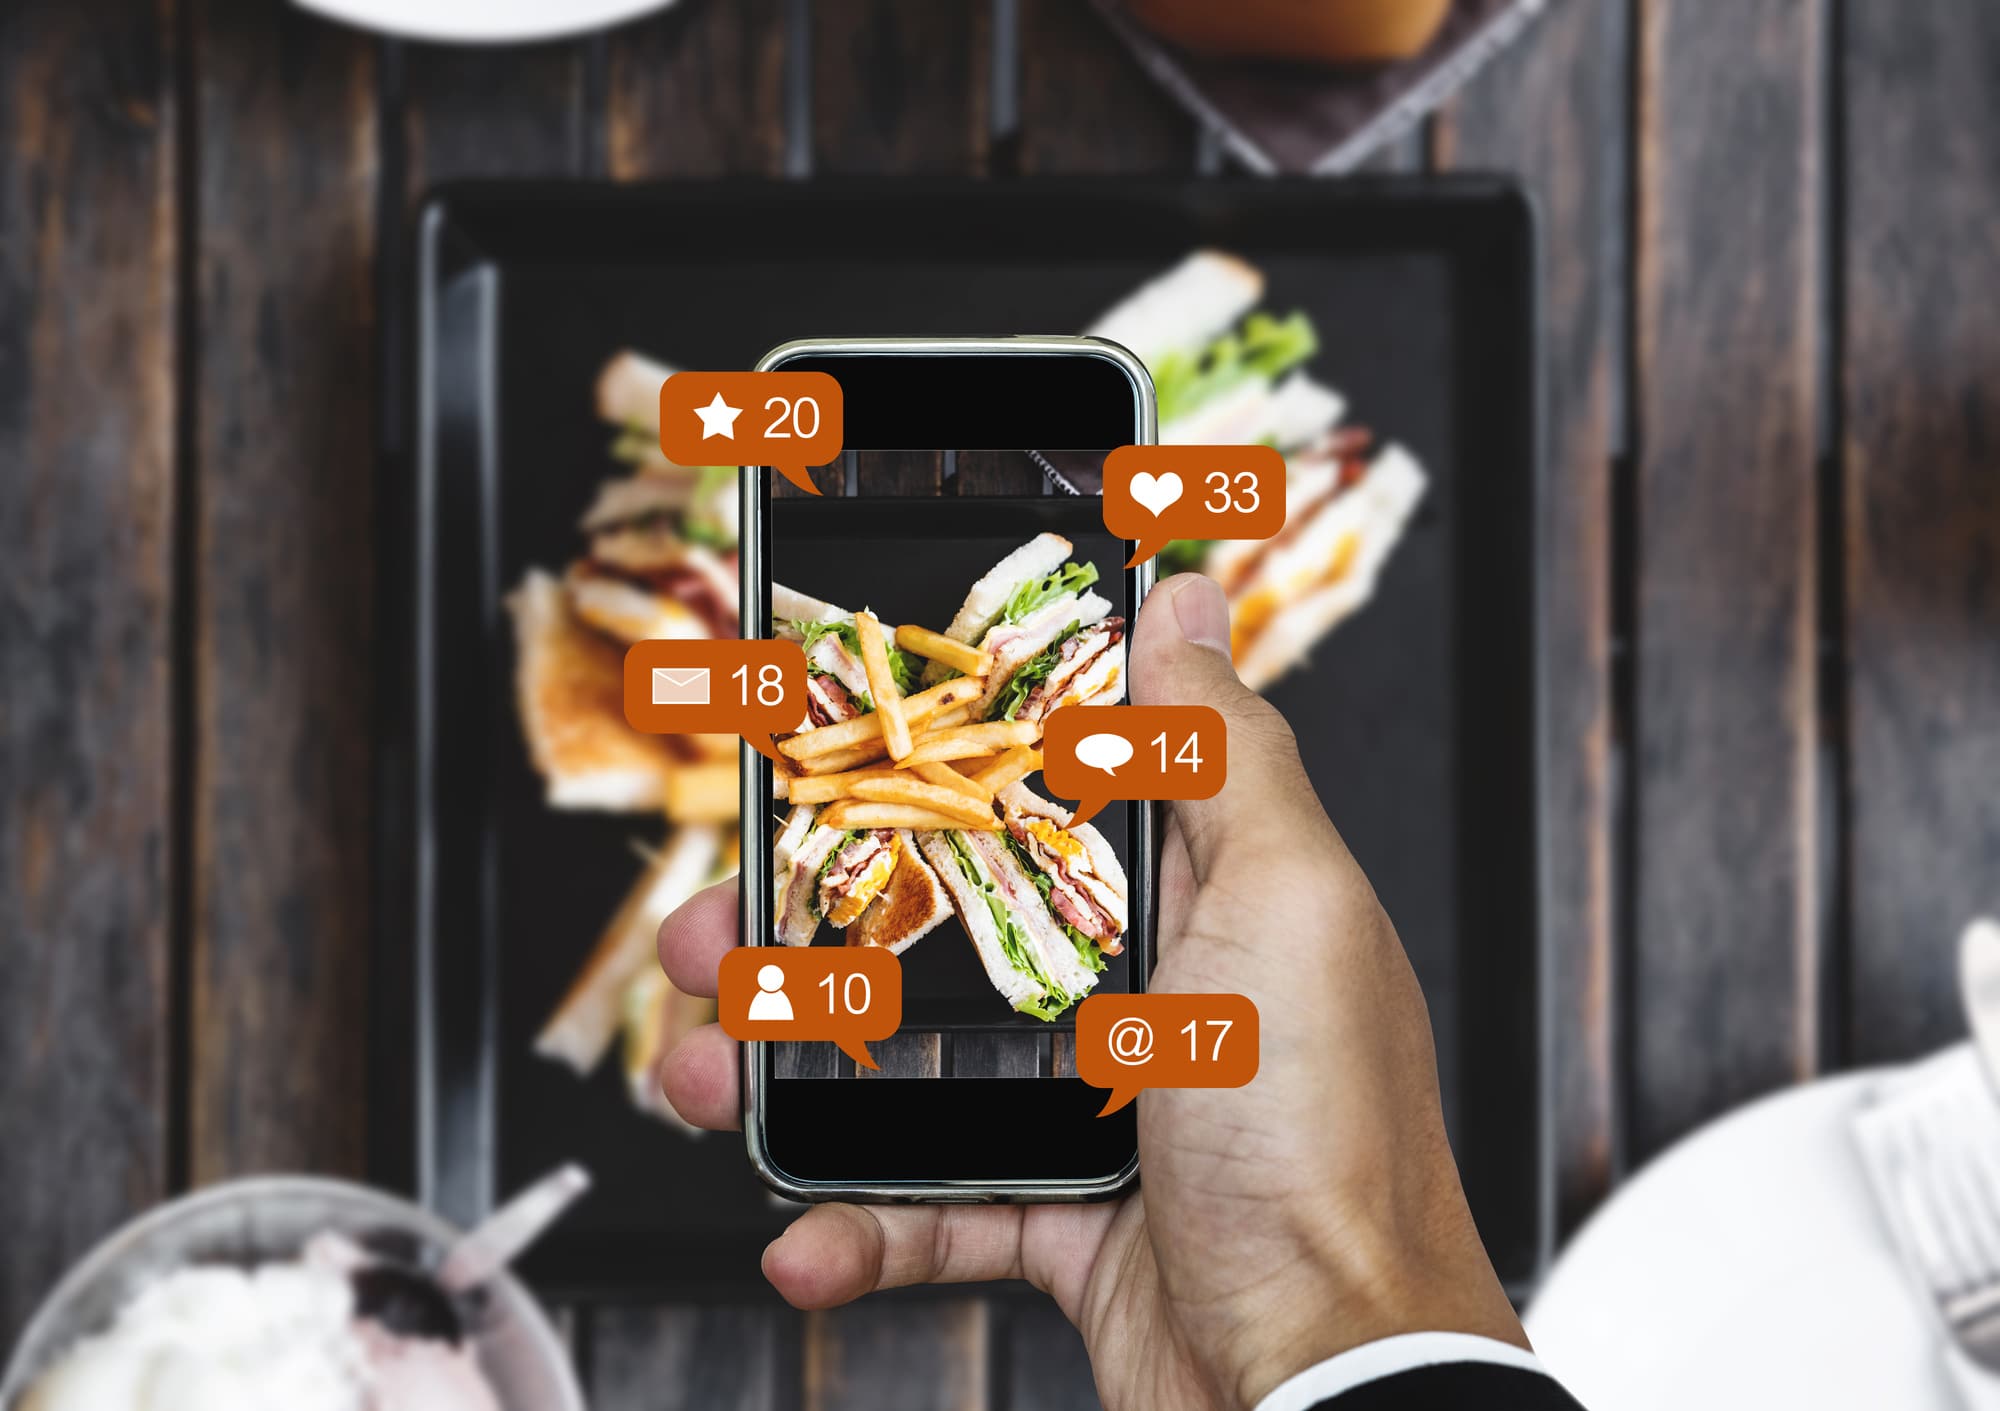 social media icons on mobile phone at restaurant